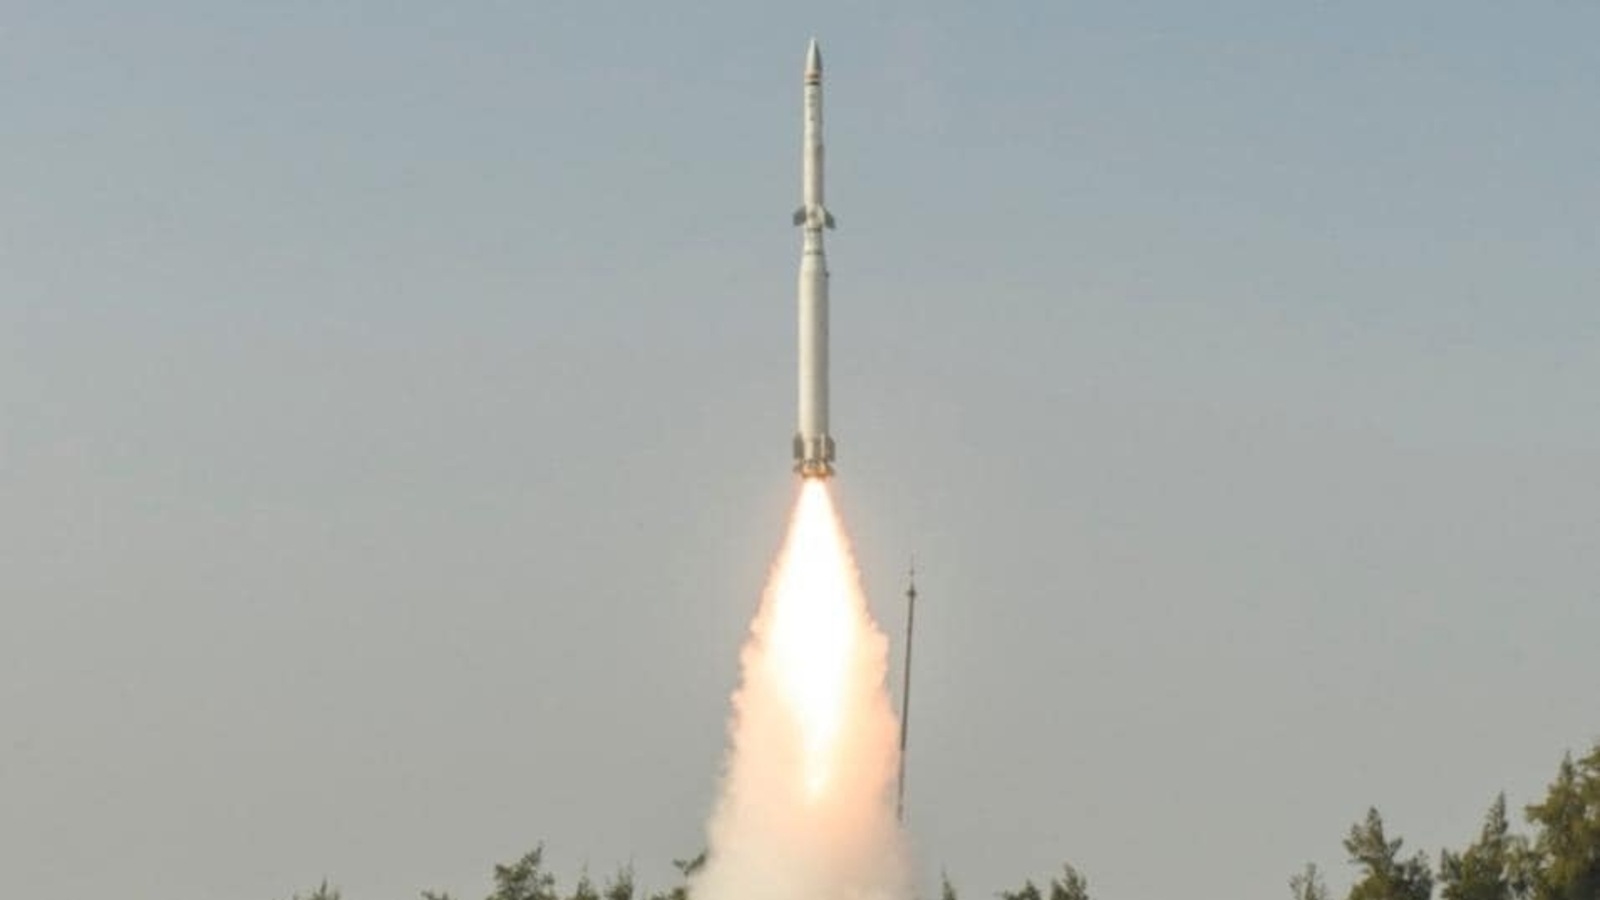 evening-brief-drdo-chief-on-new-ballistic-missile-defence-system-ad-1-interceptor-and-all-the-latest-news